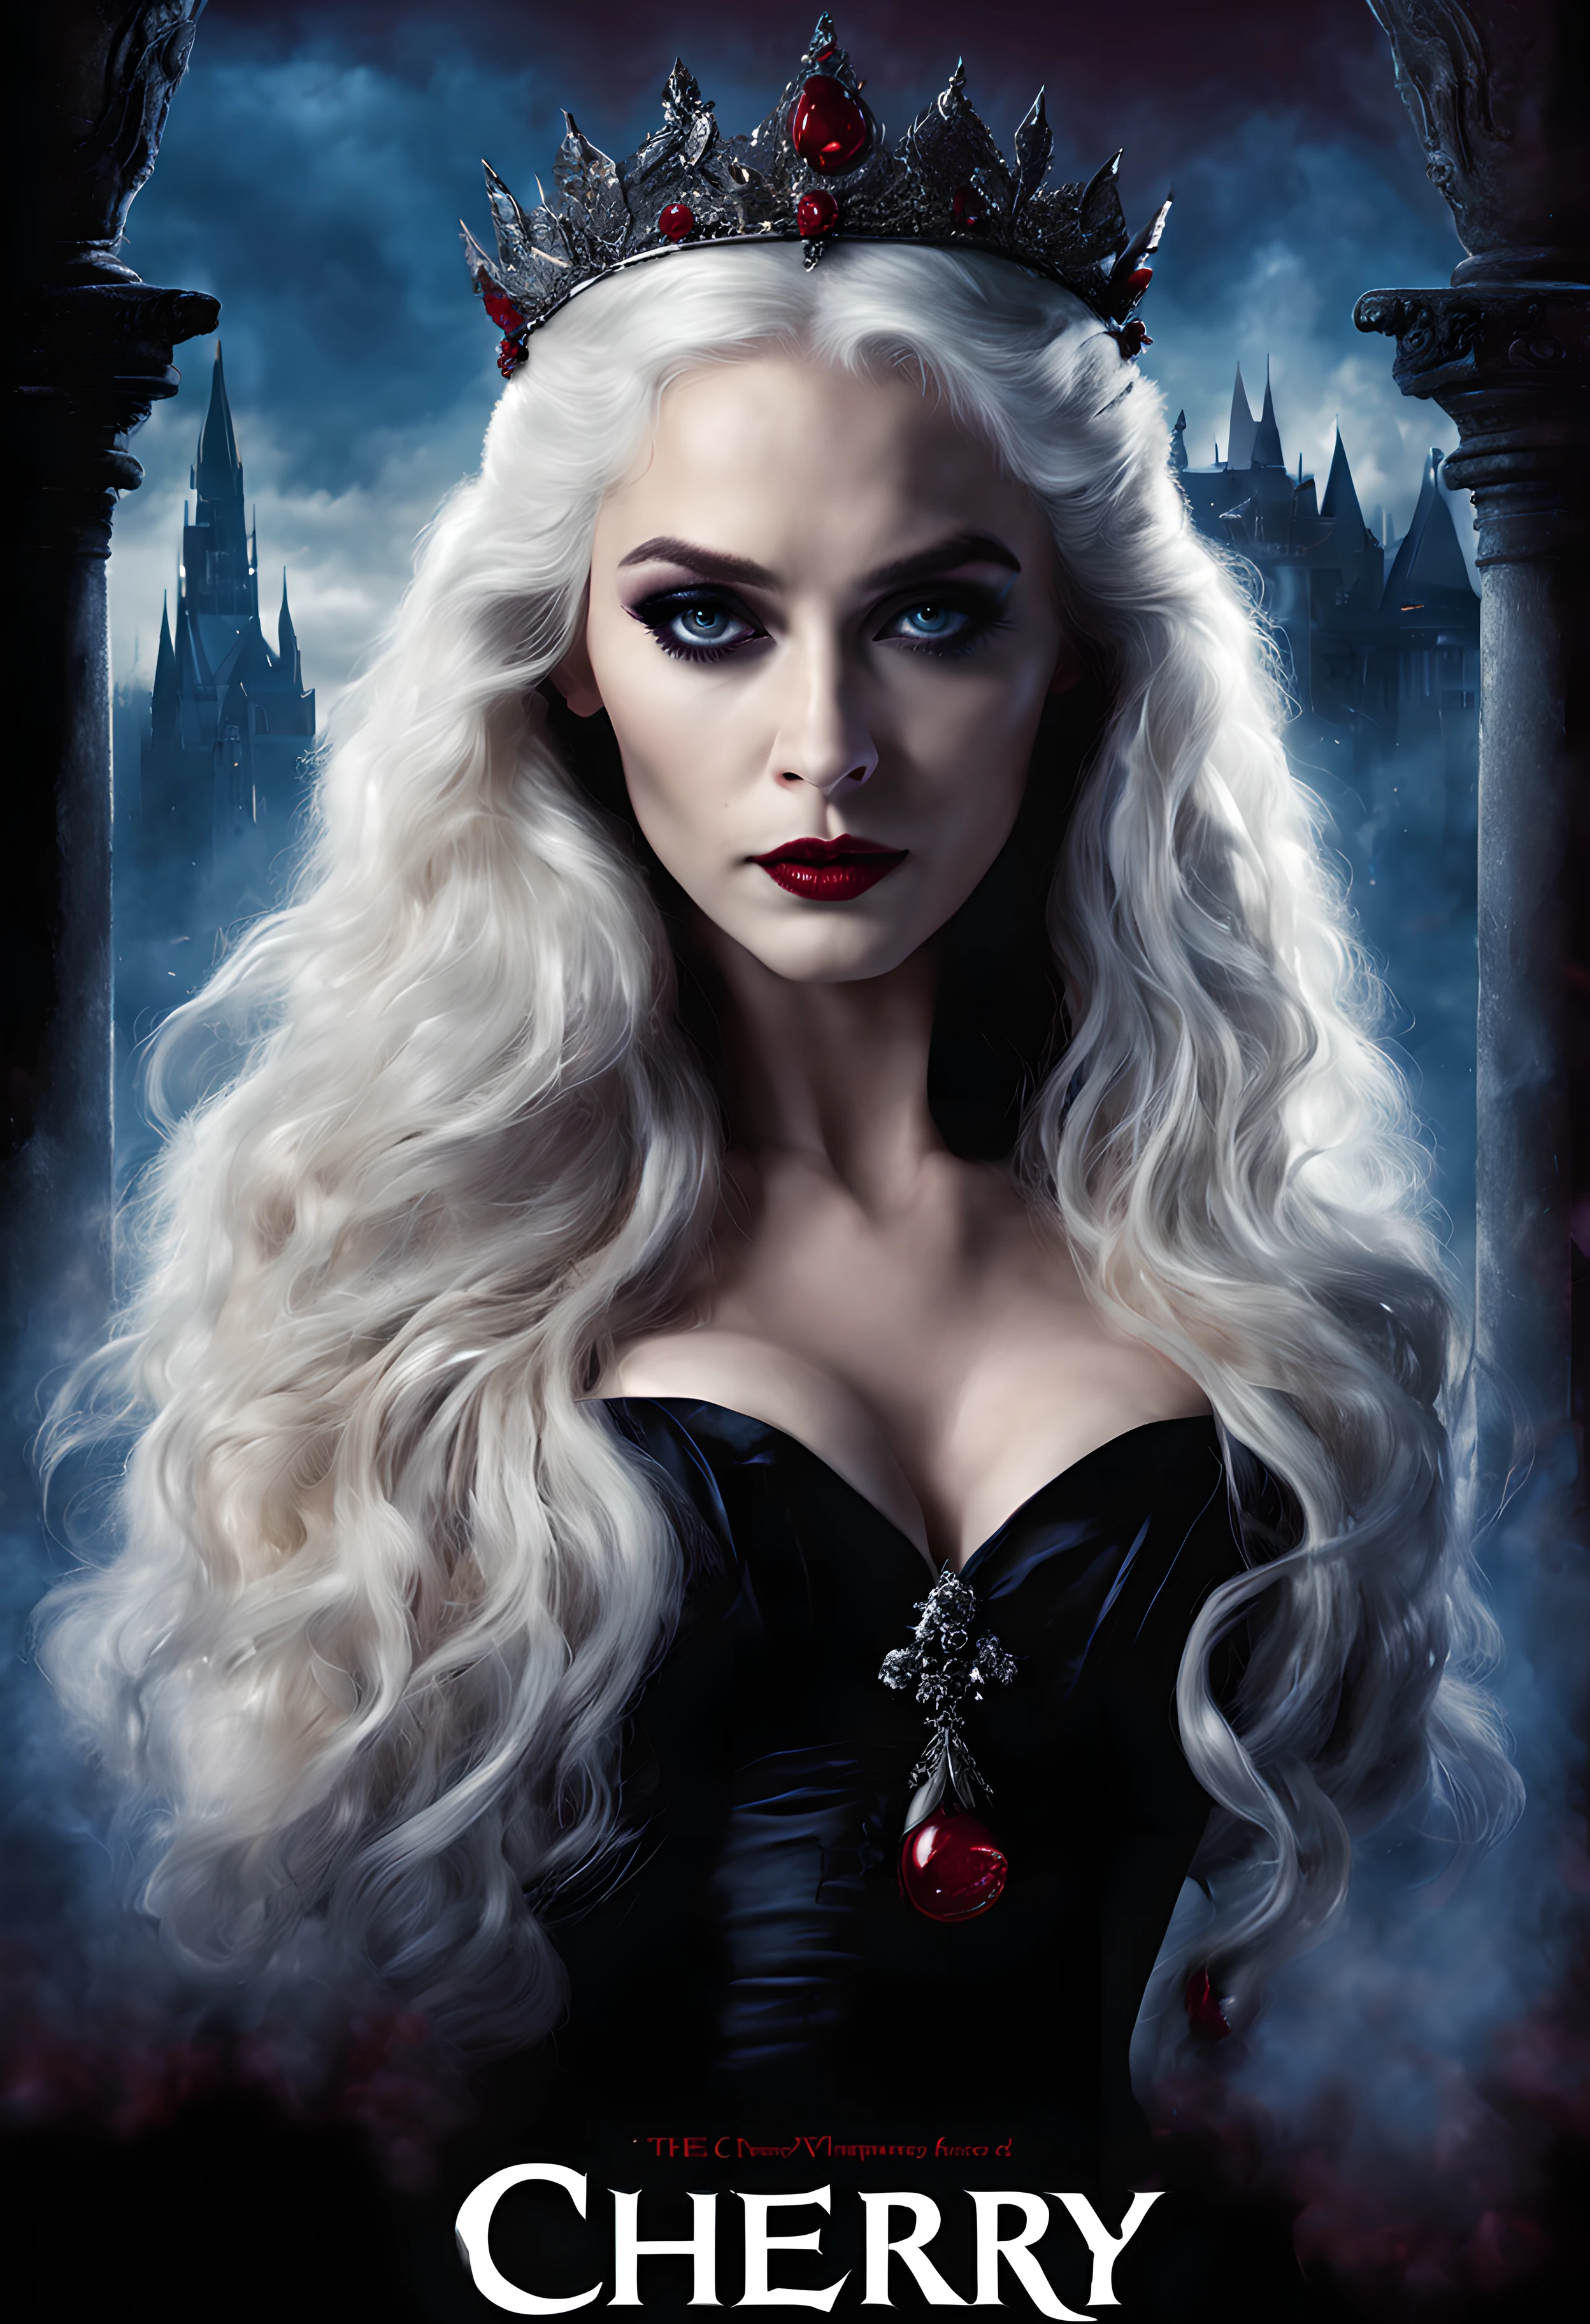 visually appealing poster of a movie with the (written title "Cherry"), captivating composition, the poster should evoke a sense of romance and allure, reflecting the vampire queen's seductive nature, blue eyes should be prominently displayed drawing attention and creating a striking visual impact, long white hair should be flowing and elegant adding to her ethereal charm, wearing an elegant tiara emphasizing her regal status and adding a touch of sophistication, the presence of bats in the background enhances the vampire theme and creates an atmospheric and mysterious ambiance